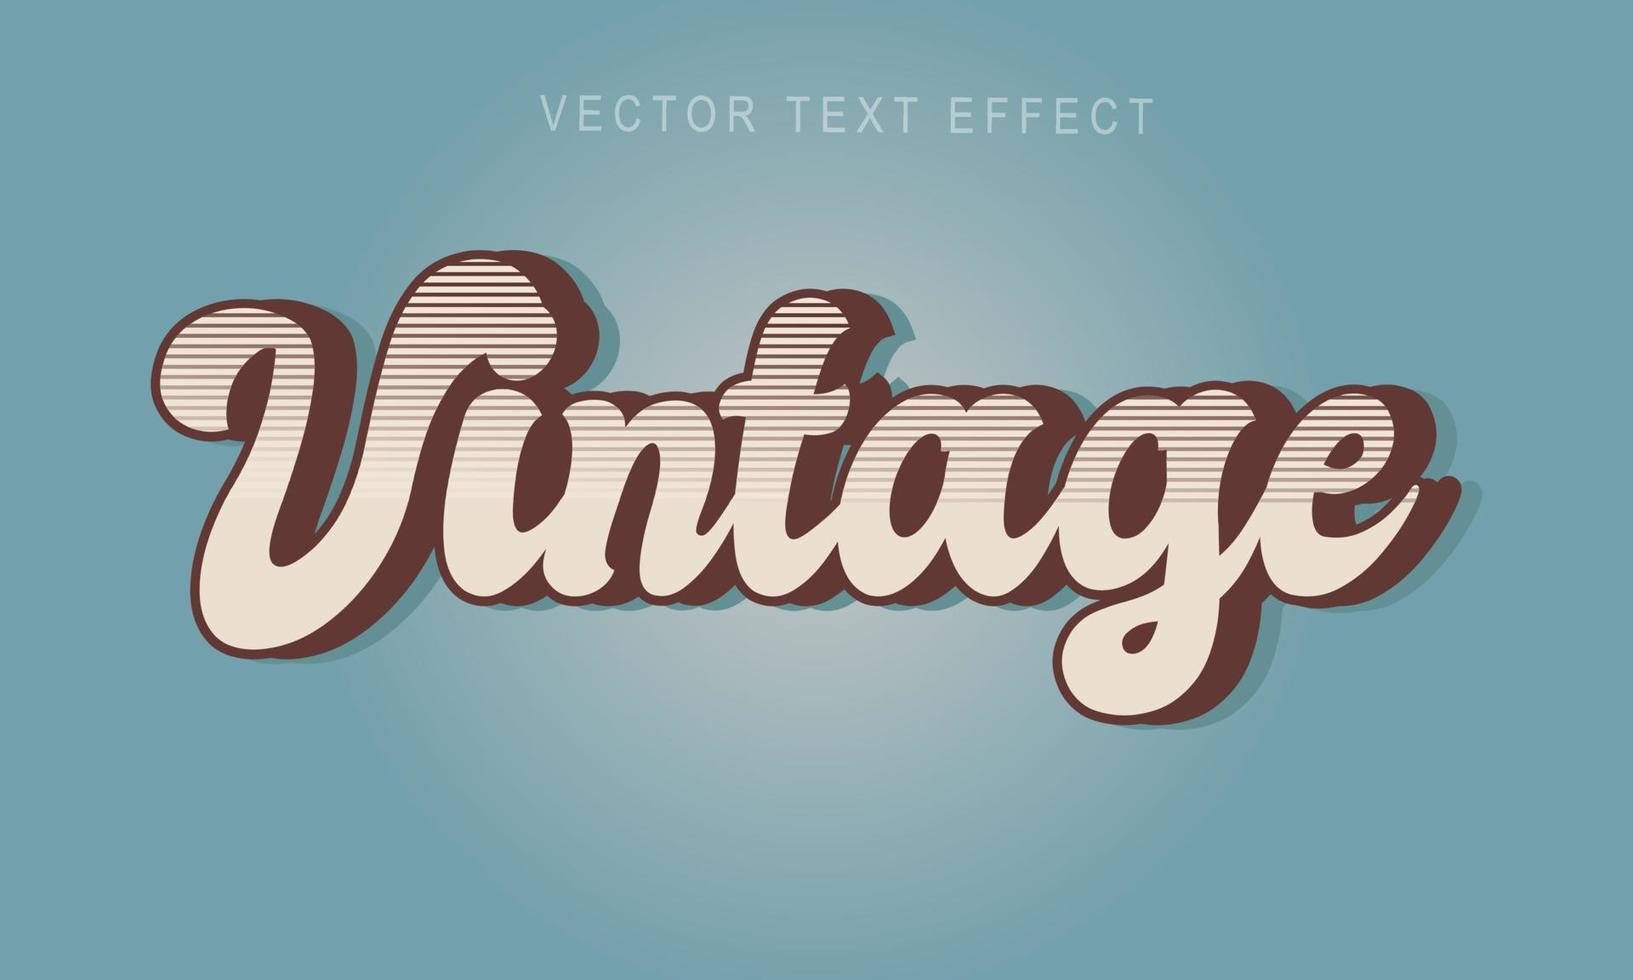 Retro, vintage editable 70s and 80s, Retro vintage and classic text style vector